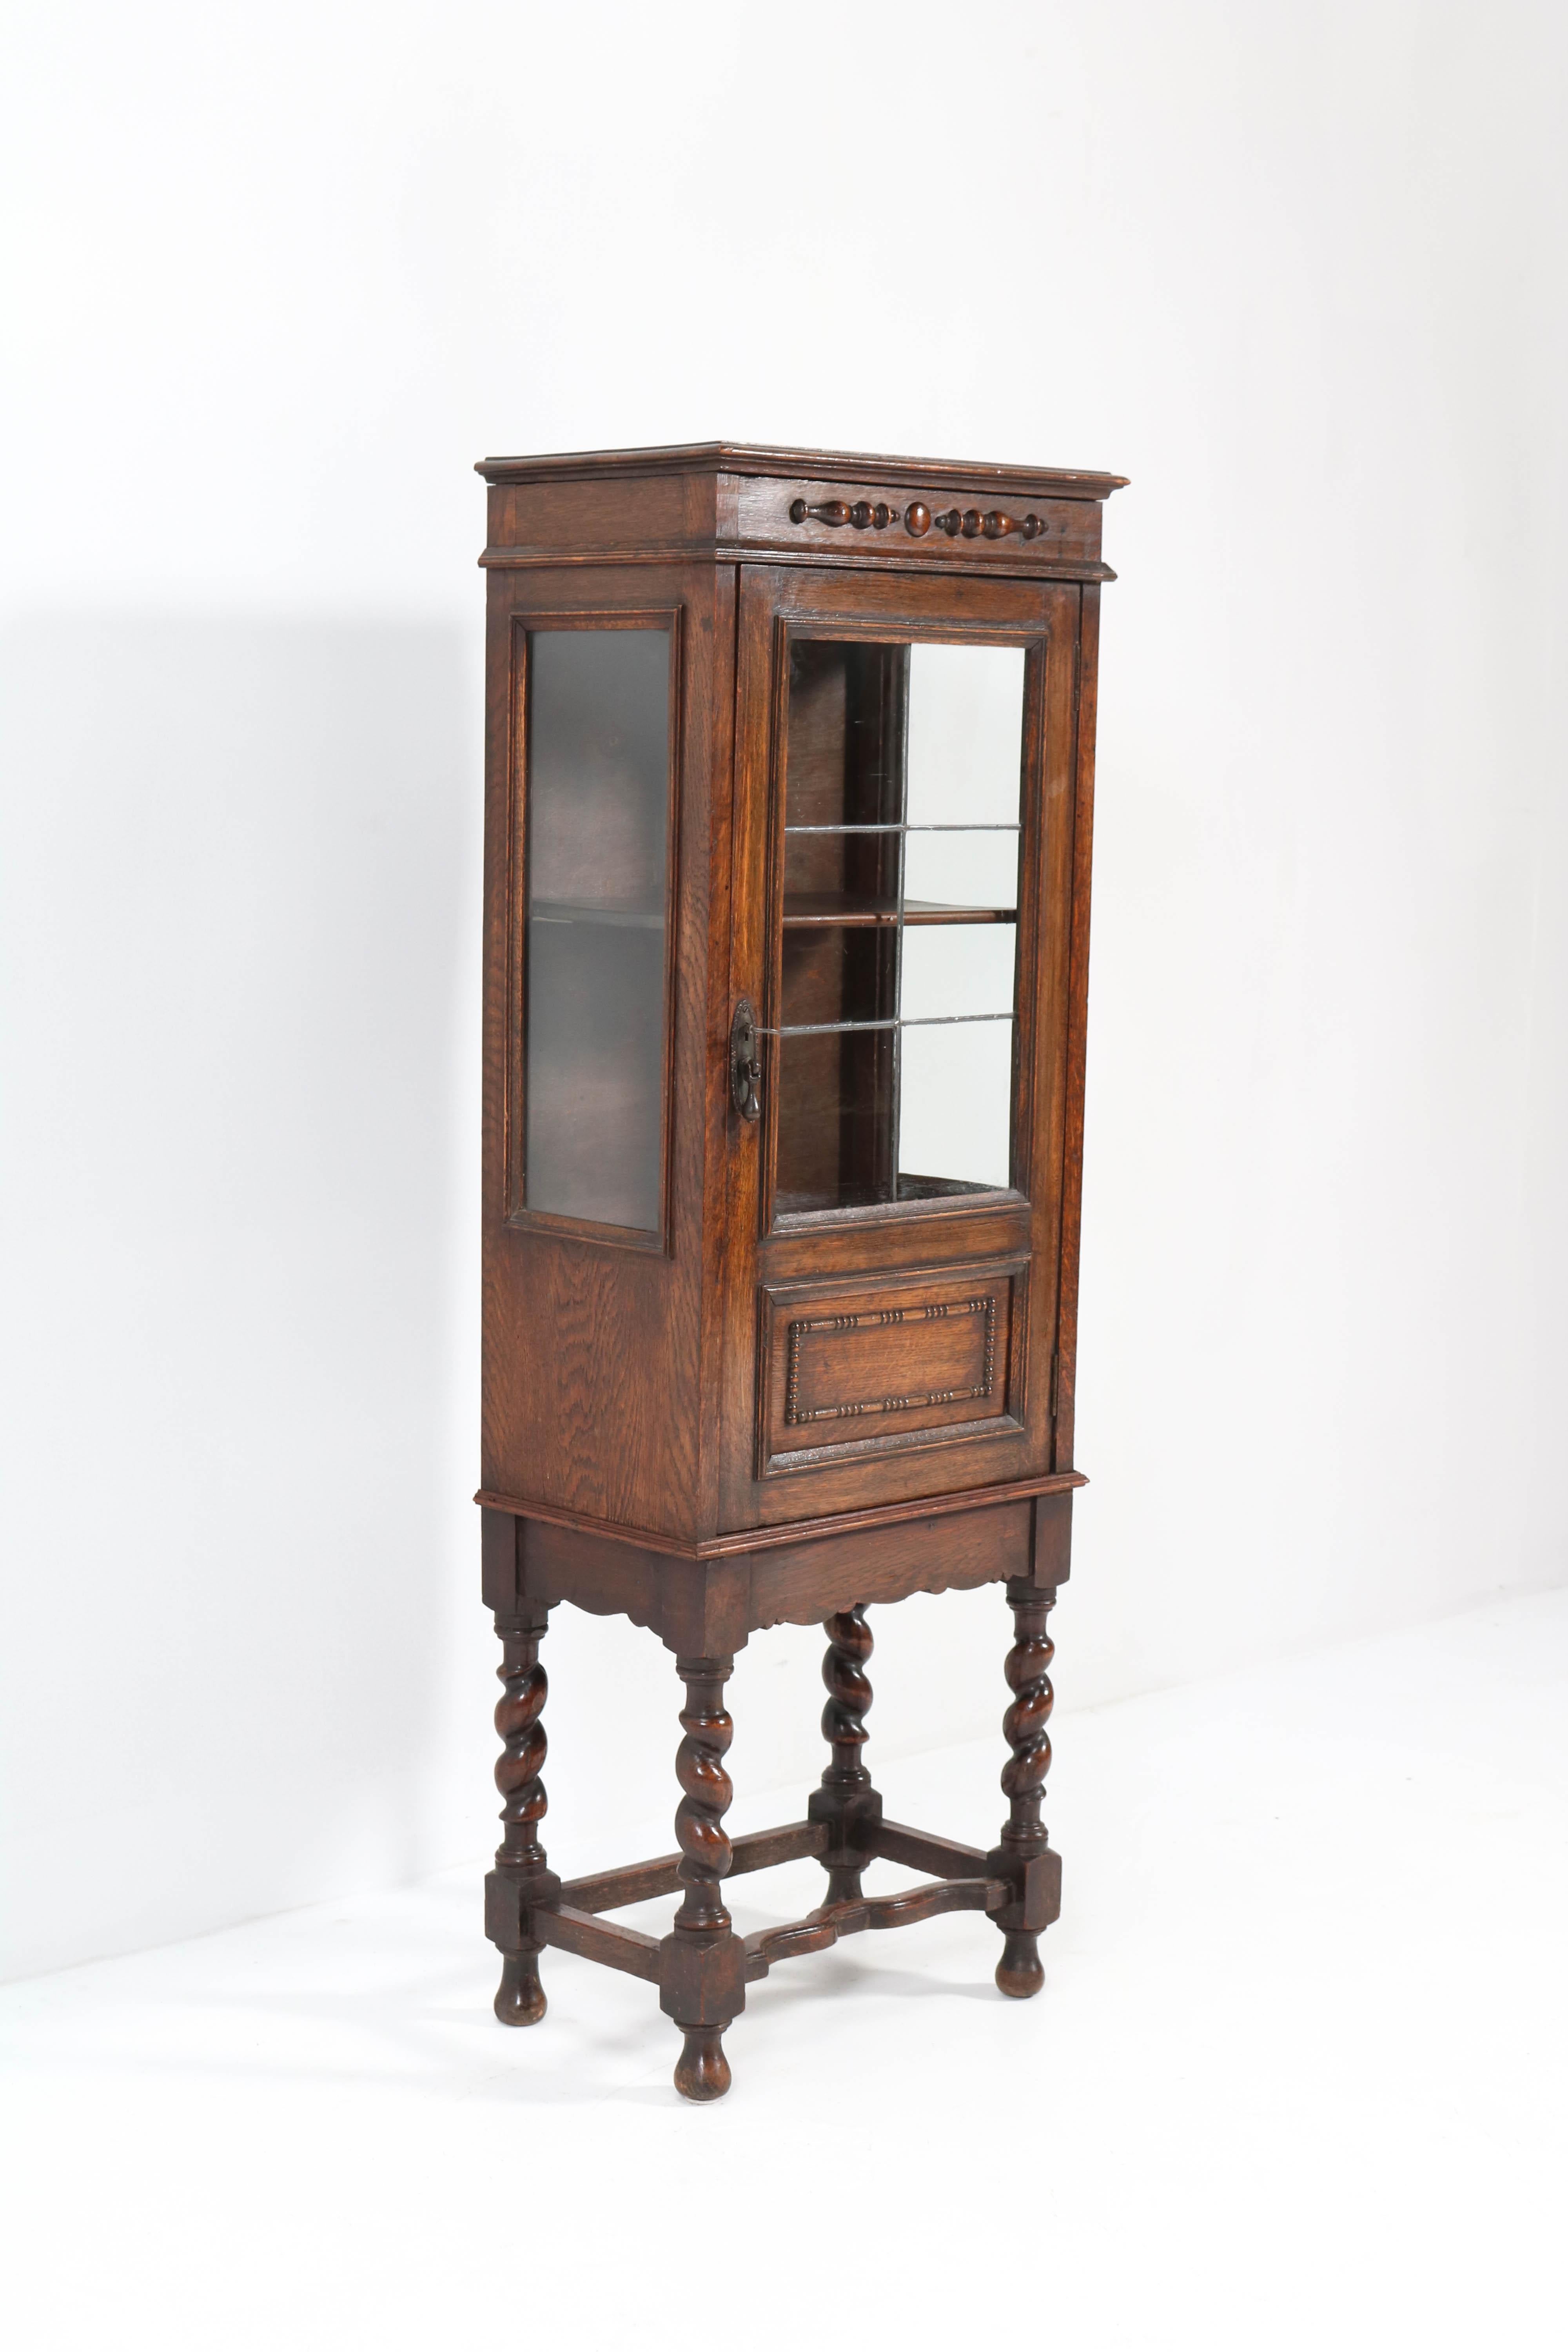 Wonderful and rare china cabinet.
Striking English design from the 1930s.
Solid oak with barley twisted legs.
This stunning piece of furniture is rare because of its rare size!
In very good condition with minor wear consistent with age and